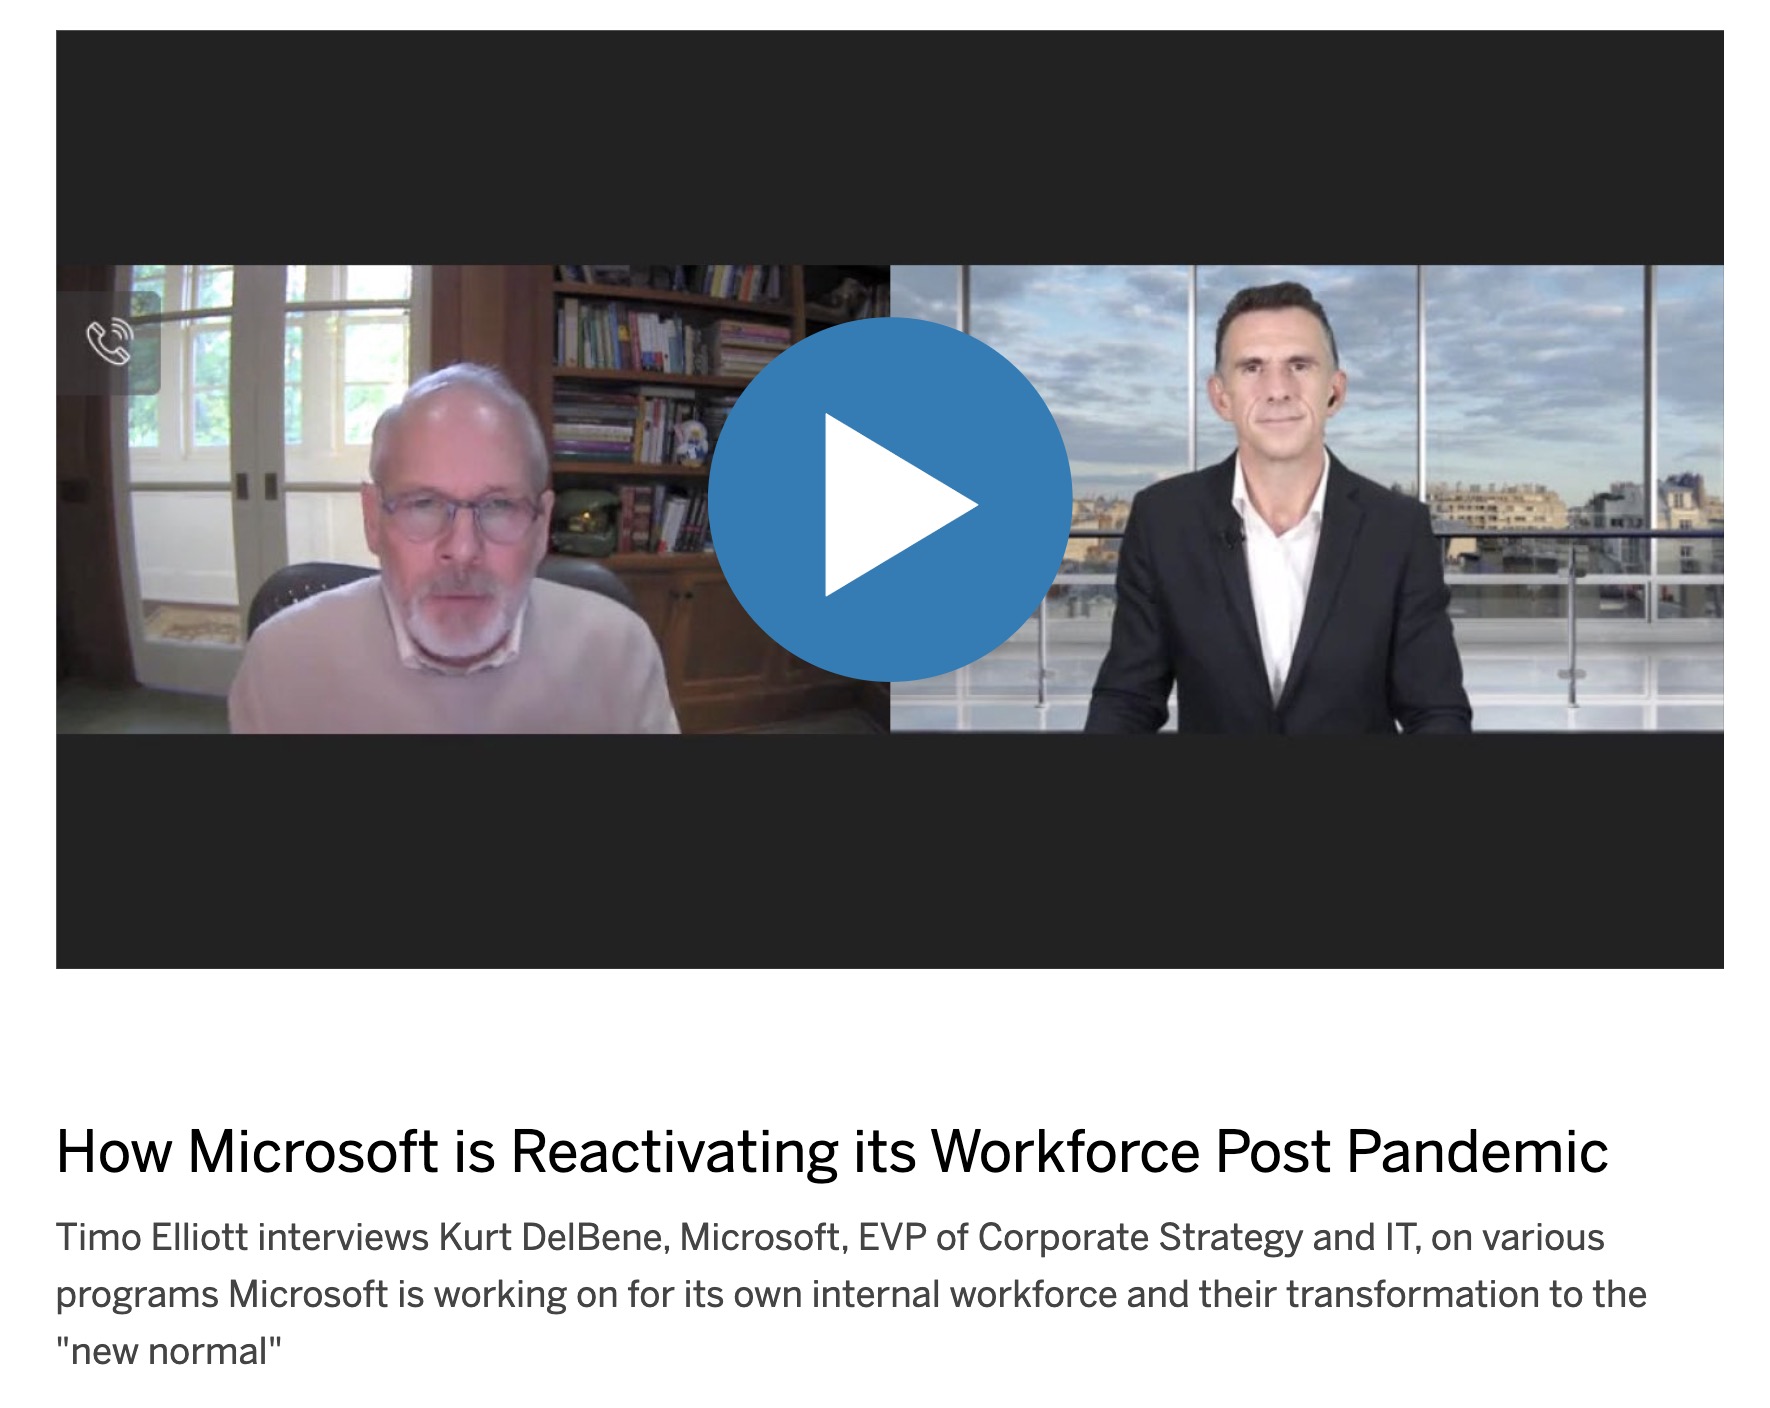 How Microsoft is Reactivating its Workforce During The Pandemic